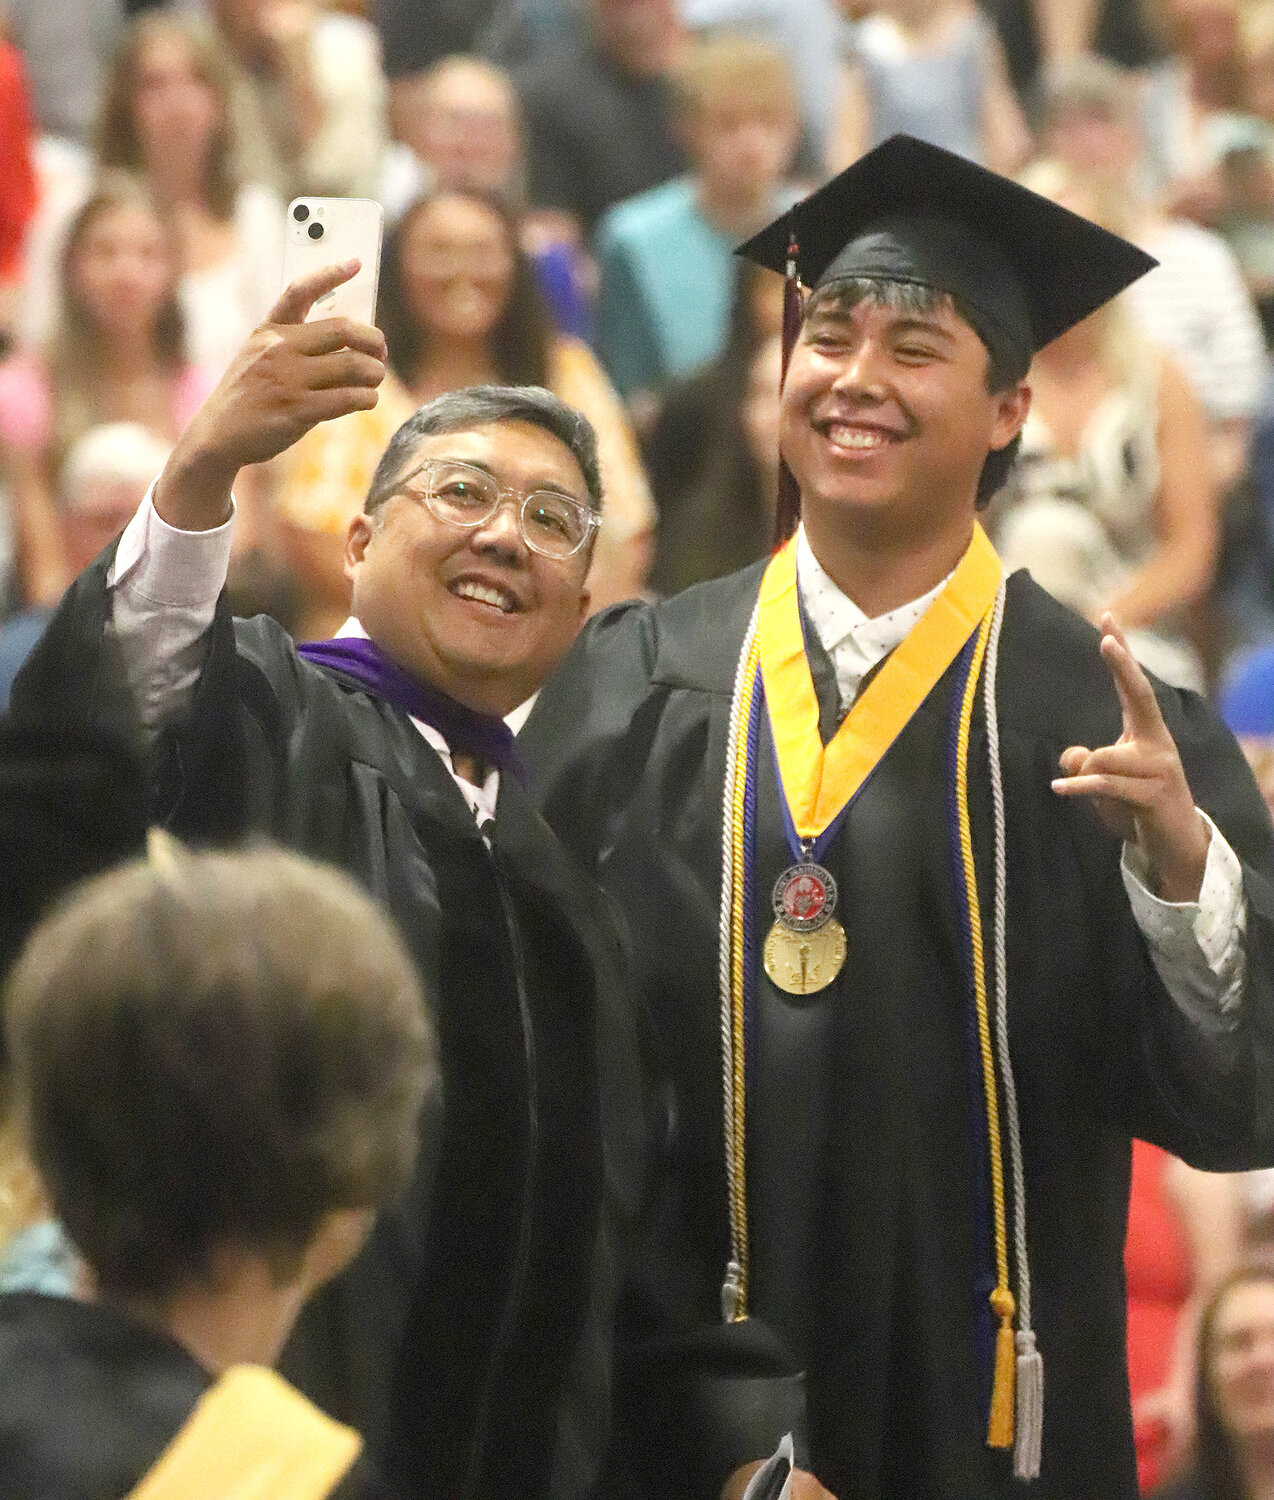 FMHS Senior Class President Oliver Santiago, right, gets a selfie with board member and father Mio Santiago as he receives his diploma Saturday morning at Fort Madison High School.